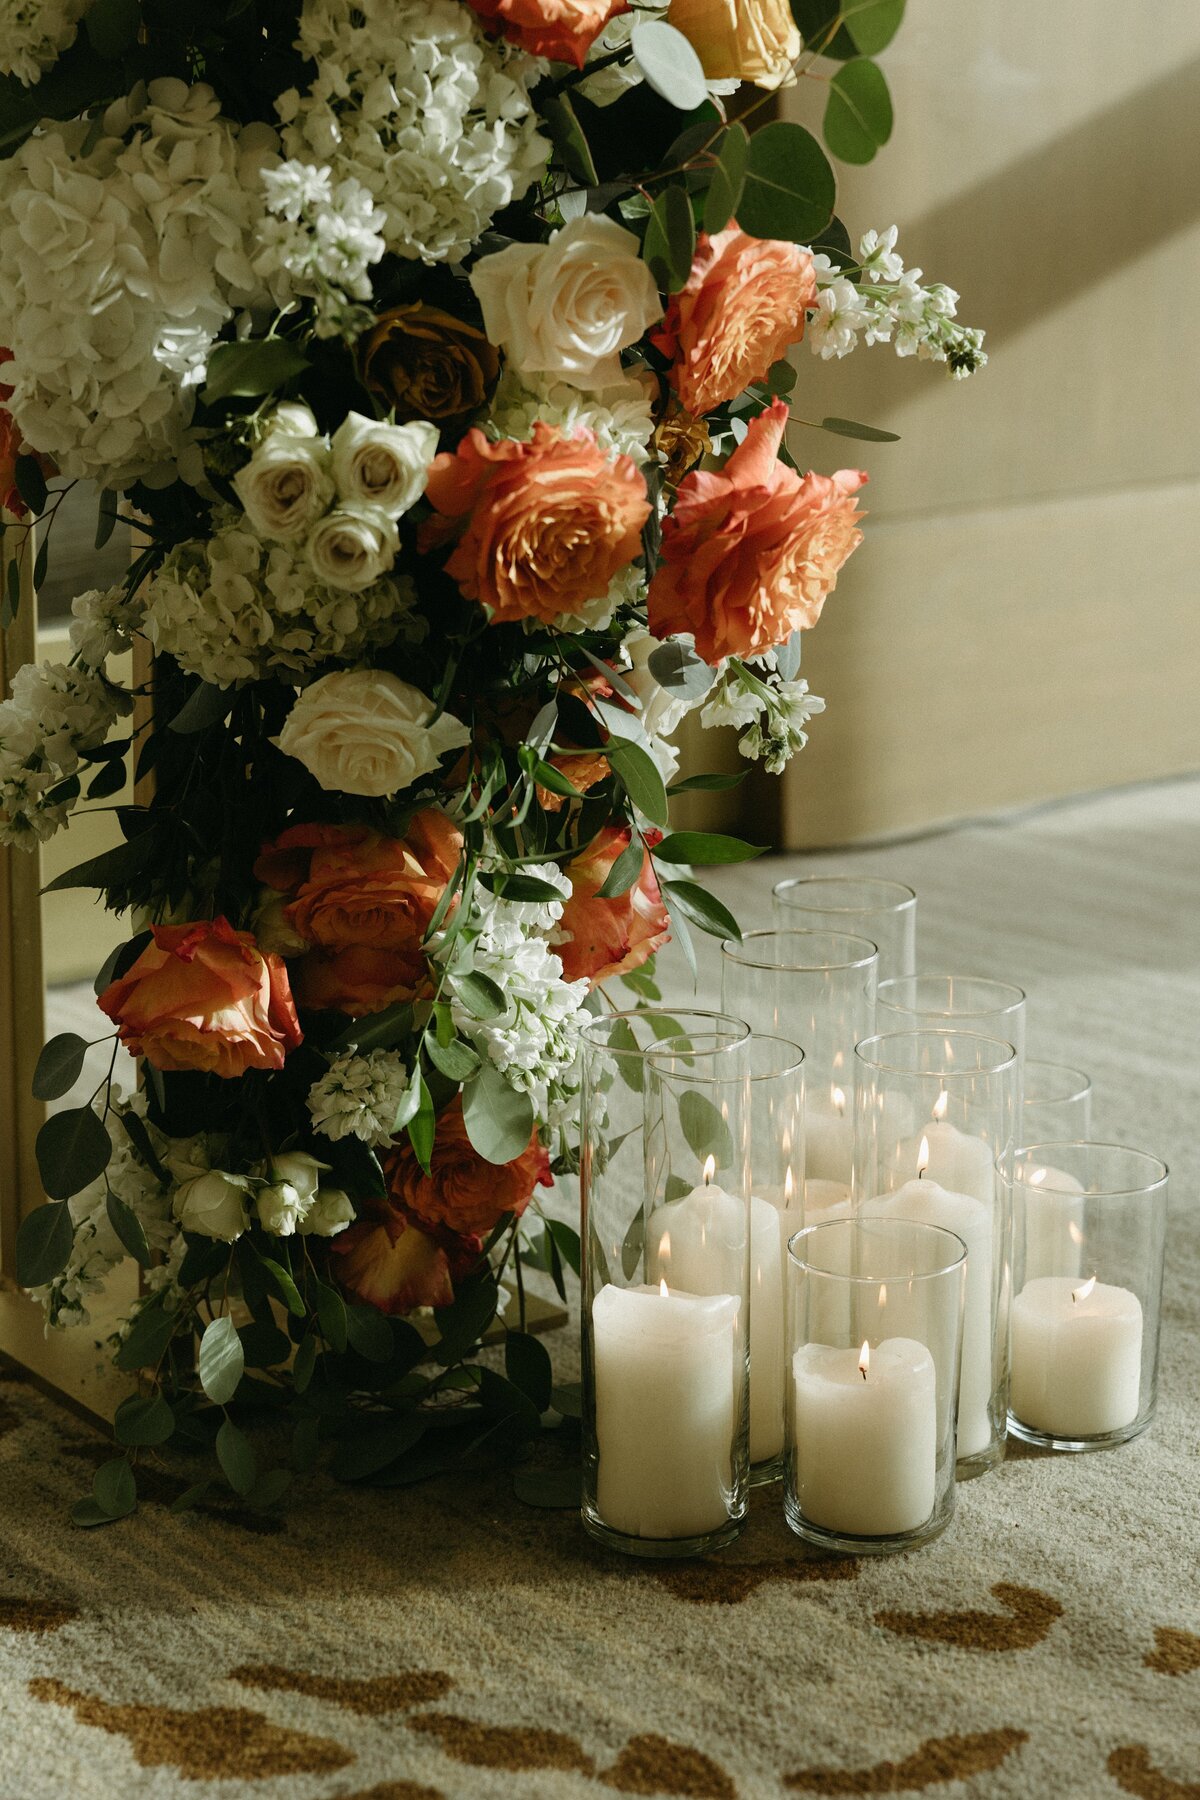 Event-Planning-DC-Washington-Dc-Wedding-Planner-Wharf-Intercontinental-Lexi-Truesdale-floral-decor-cylinders